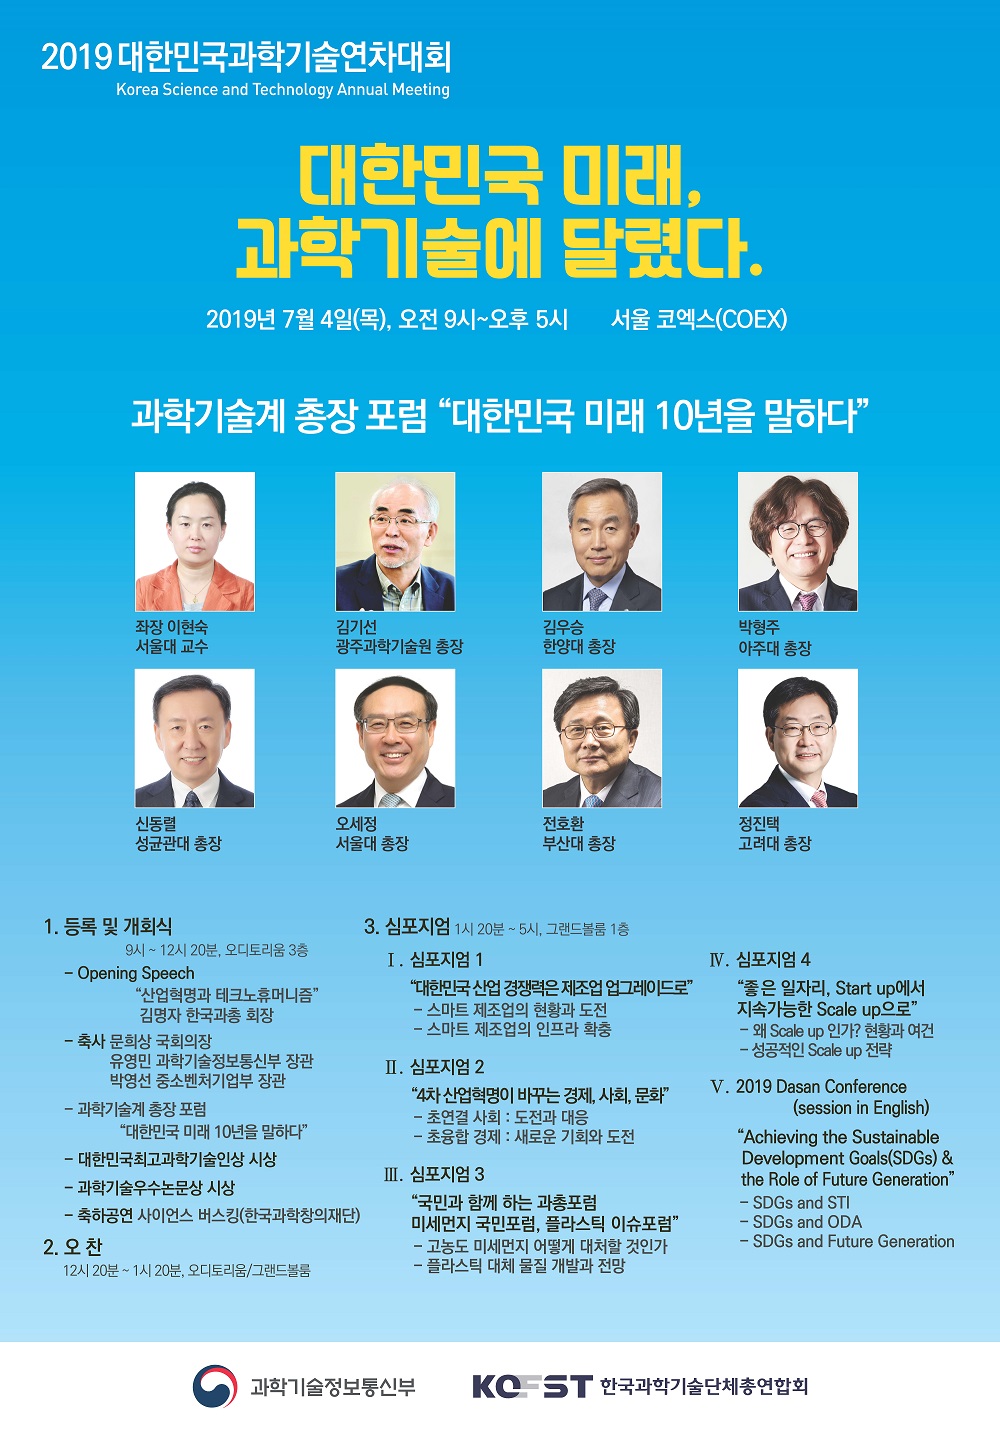 [News Release] The 2019 Korea Science and Technology Annual Conference will be held to discuss the future of Korea 이미지